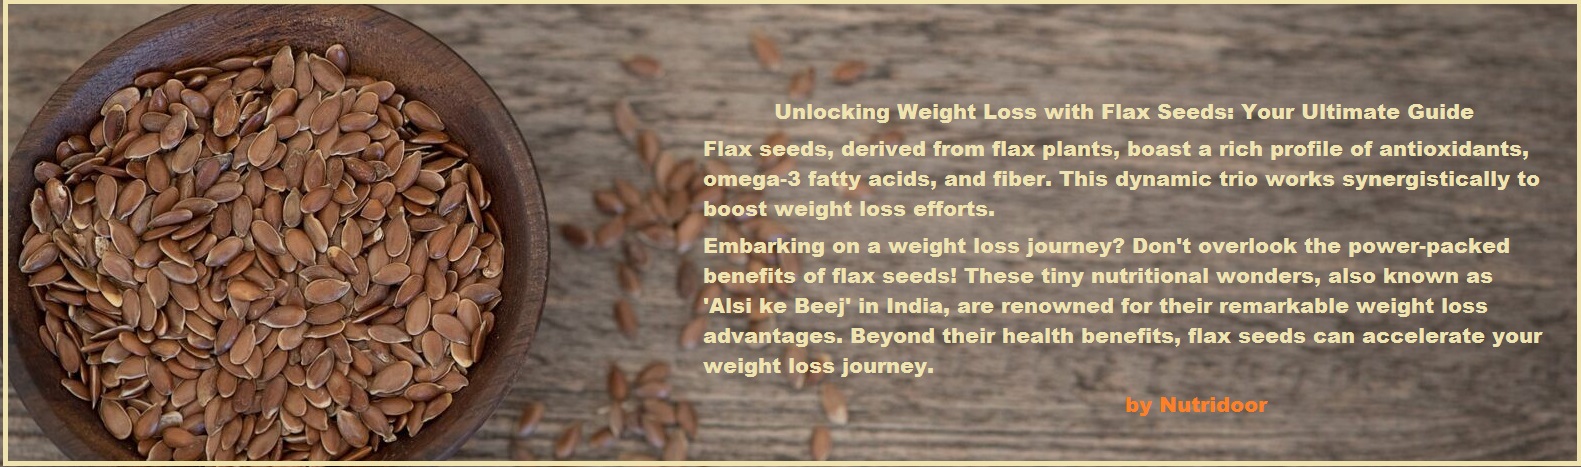 Flax Seeds benefits for weight loss